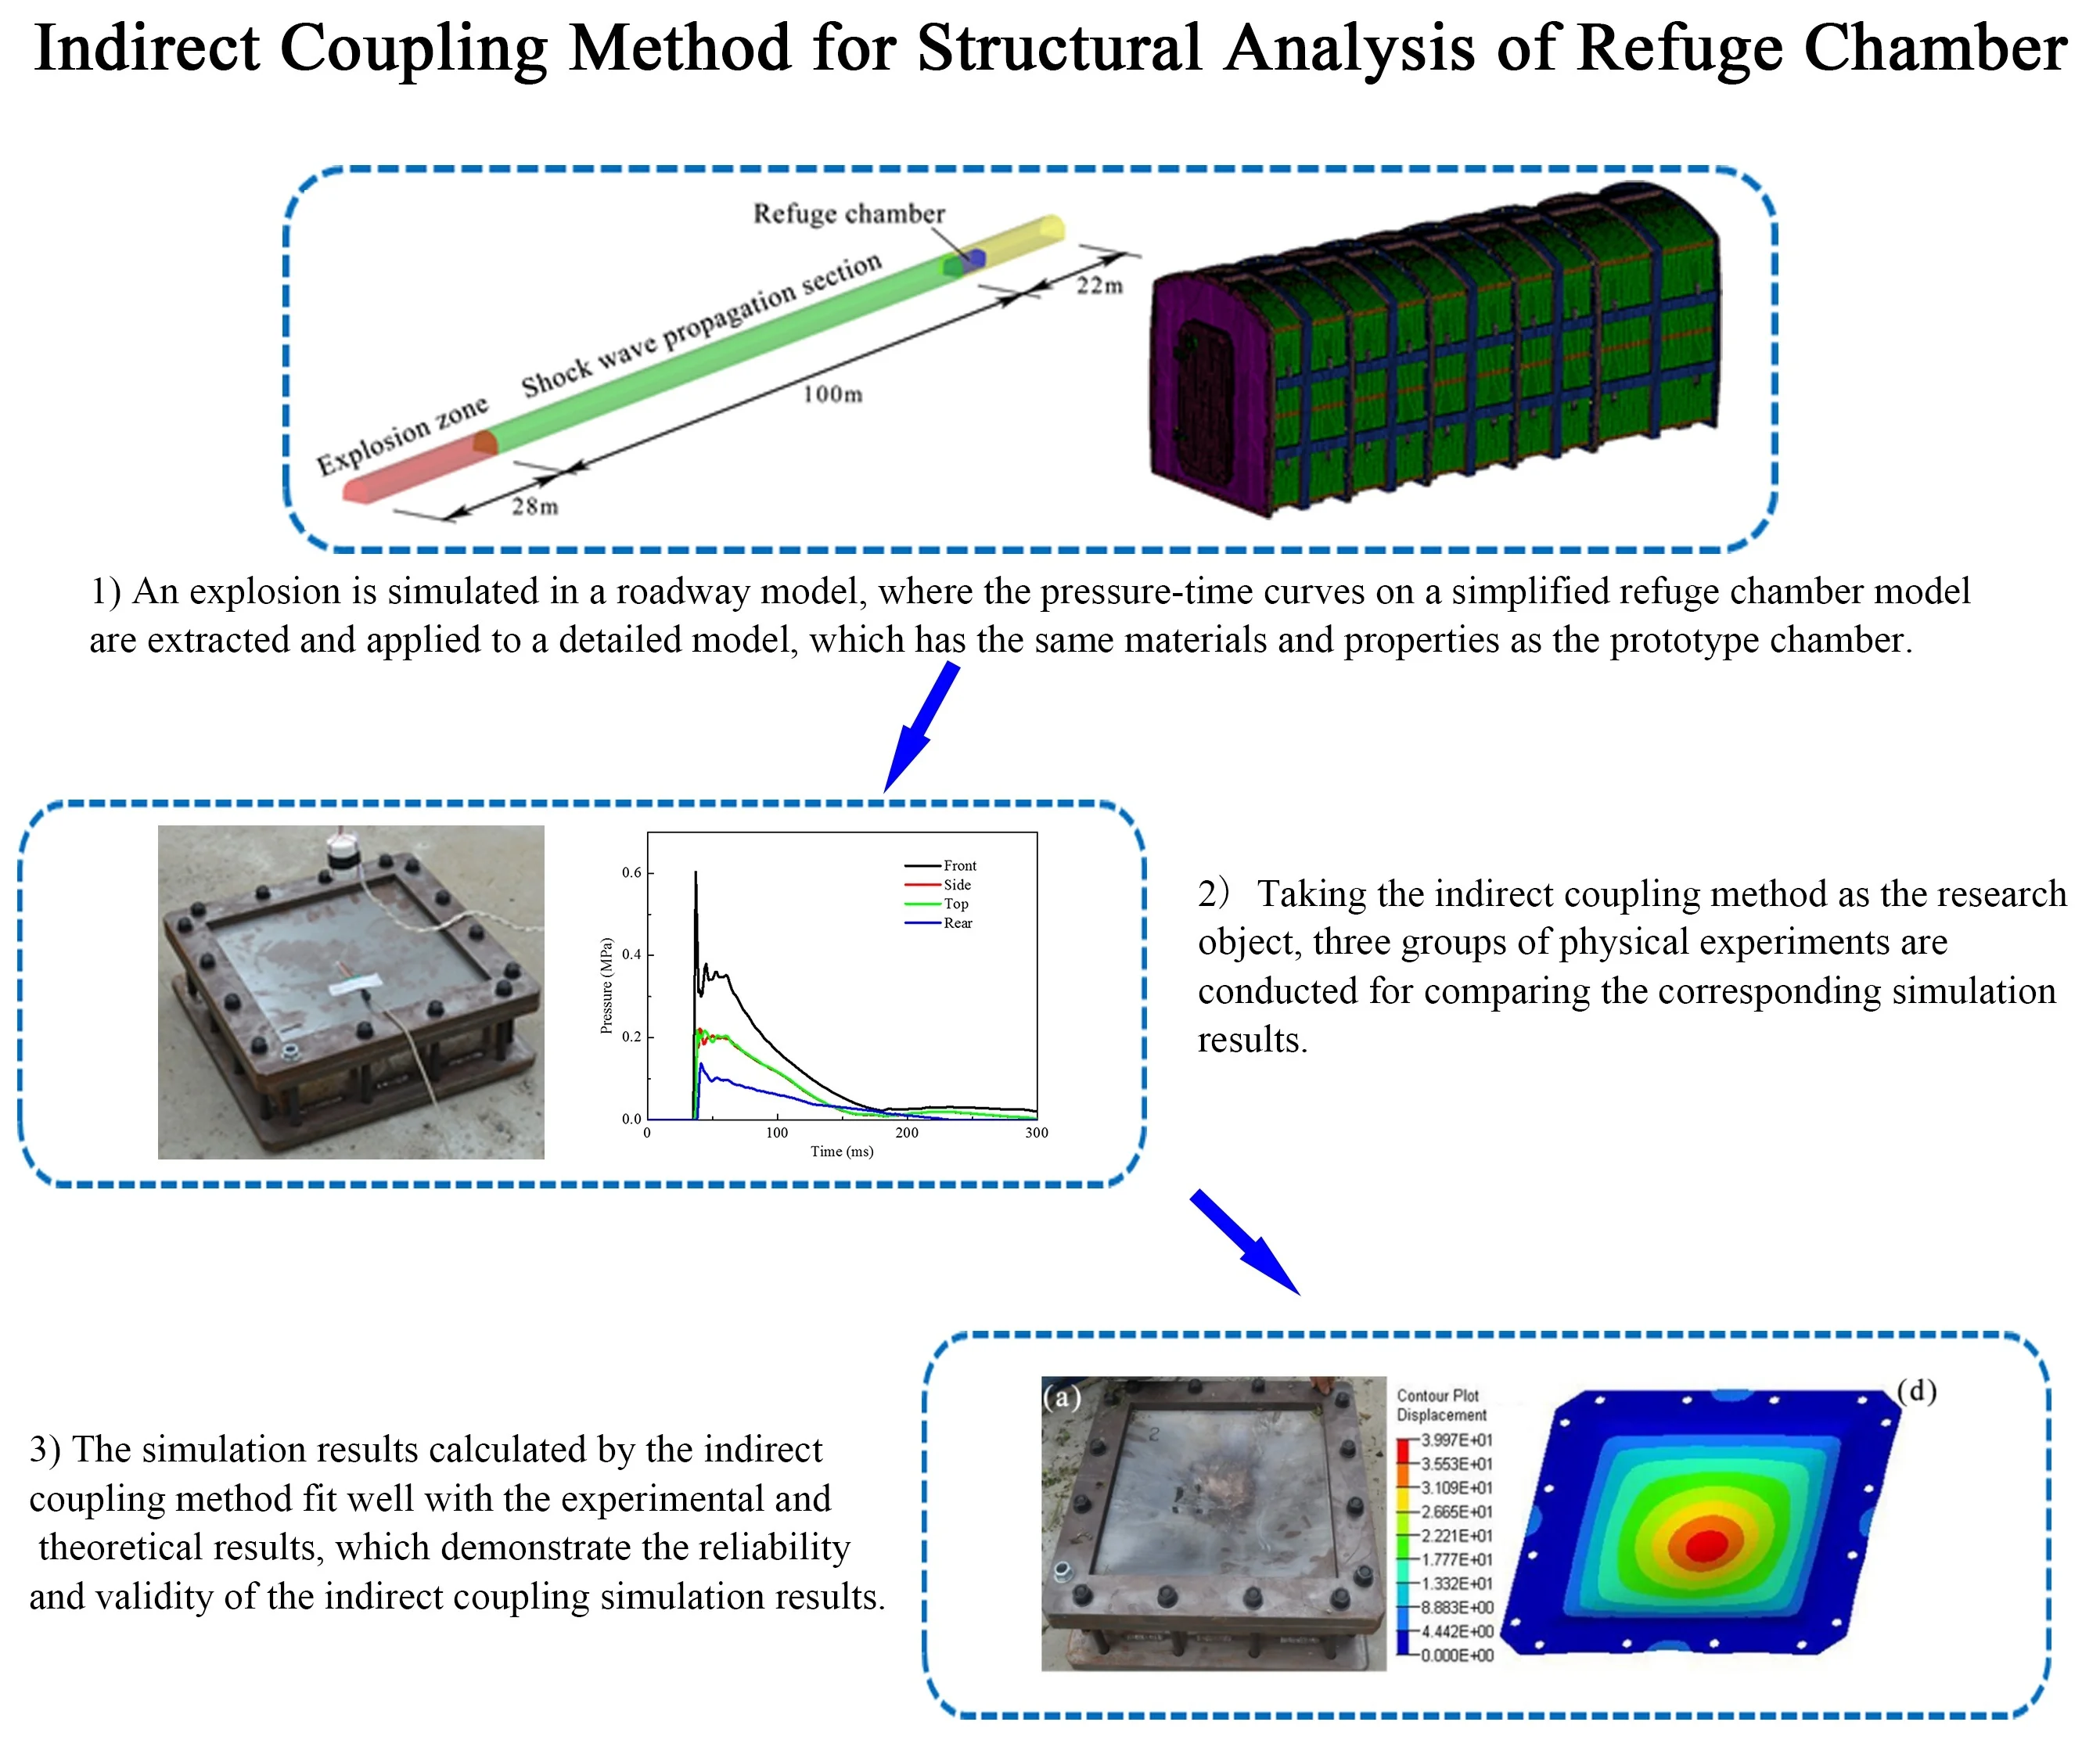 Indirect coupling method for structural analysis of refuge chamber